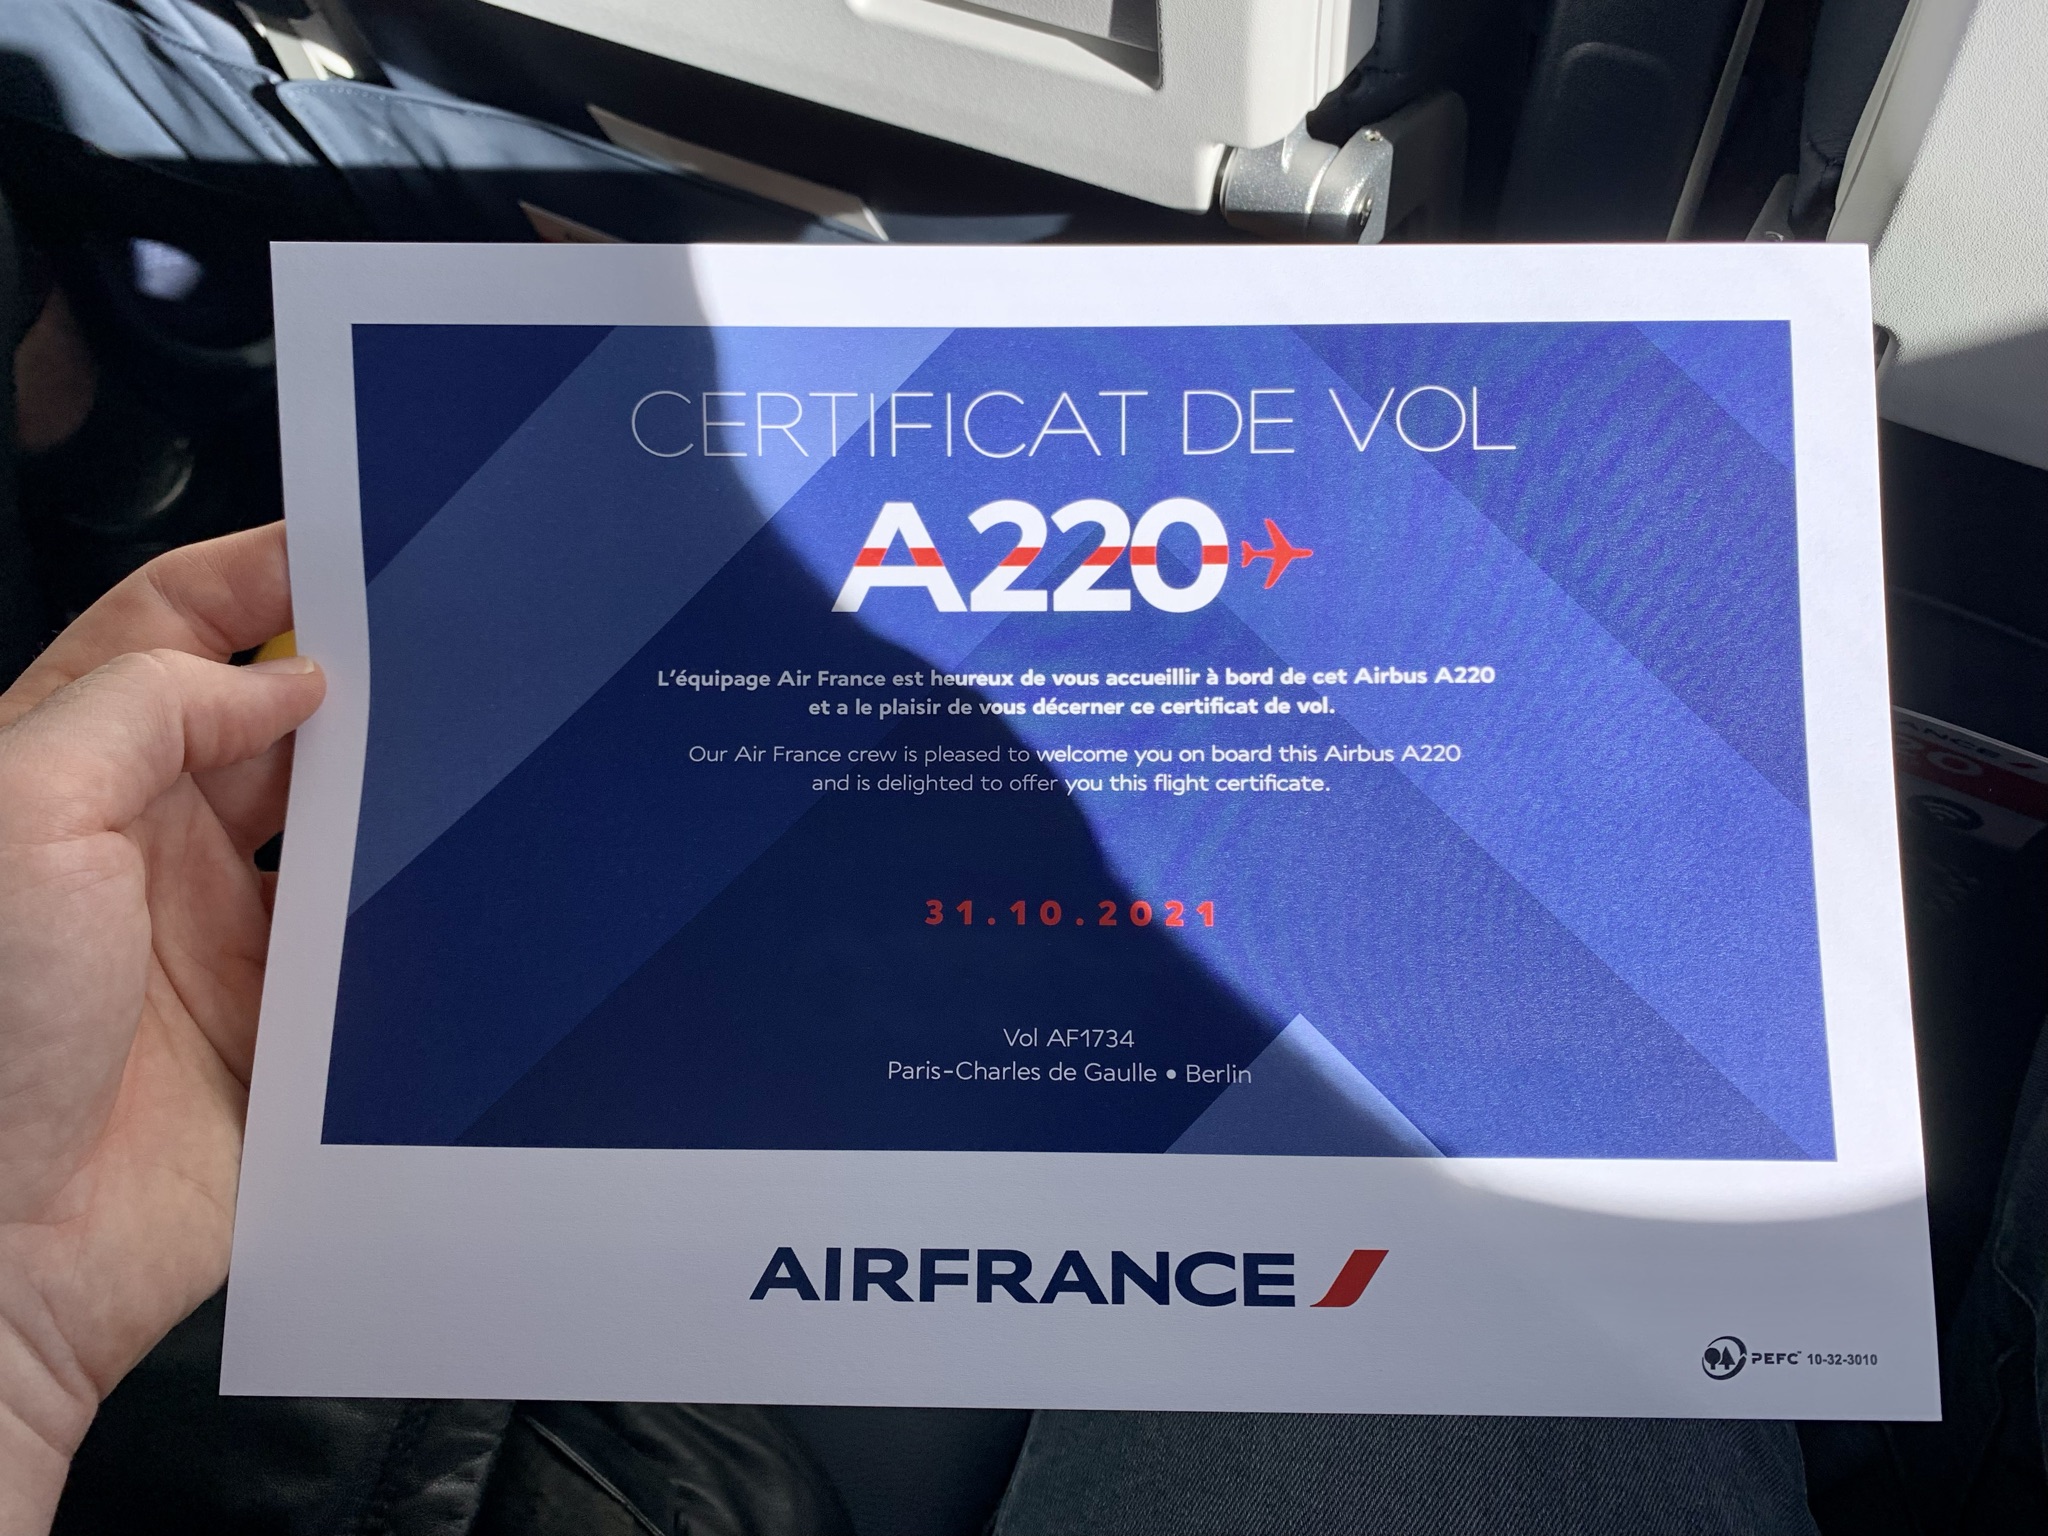 France, Airbus A 220-300 inaugural service: Paris Charles de Gaulle to Berlin in Classe Affaire – knightofmalta